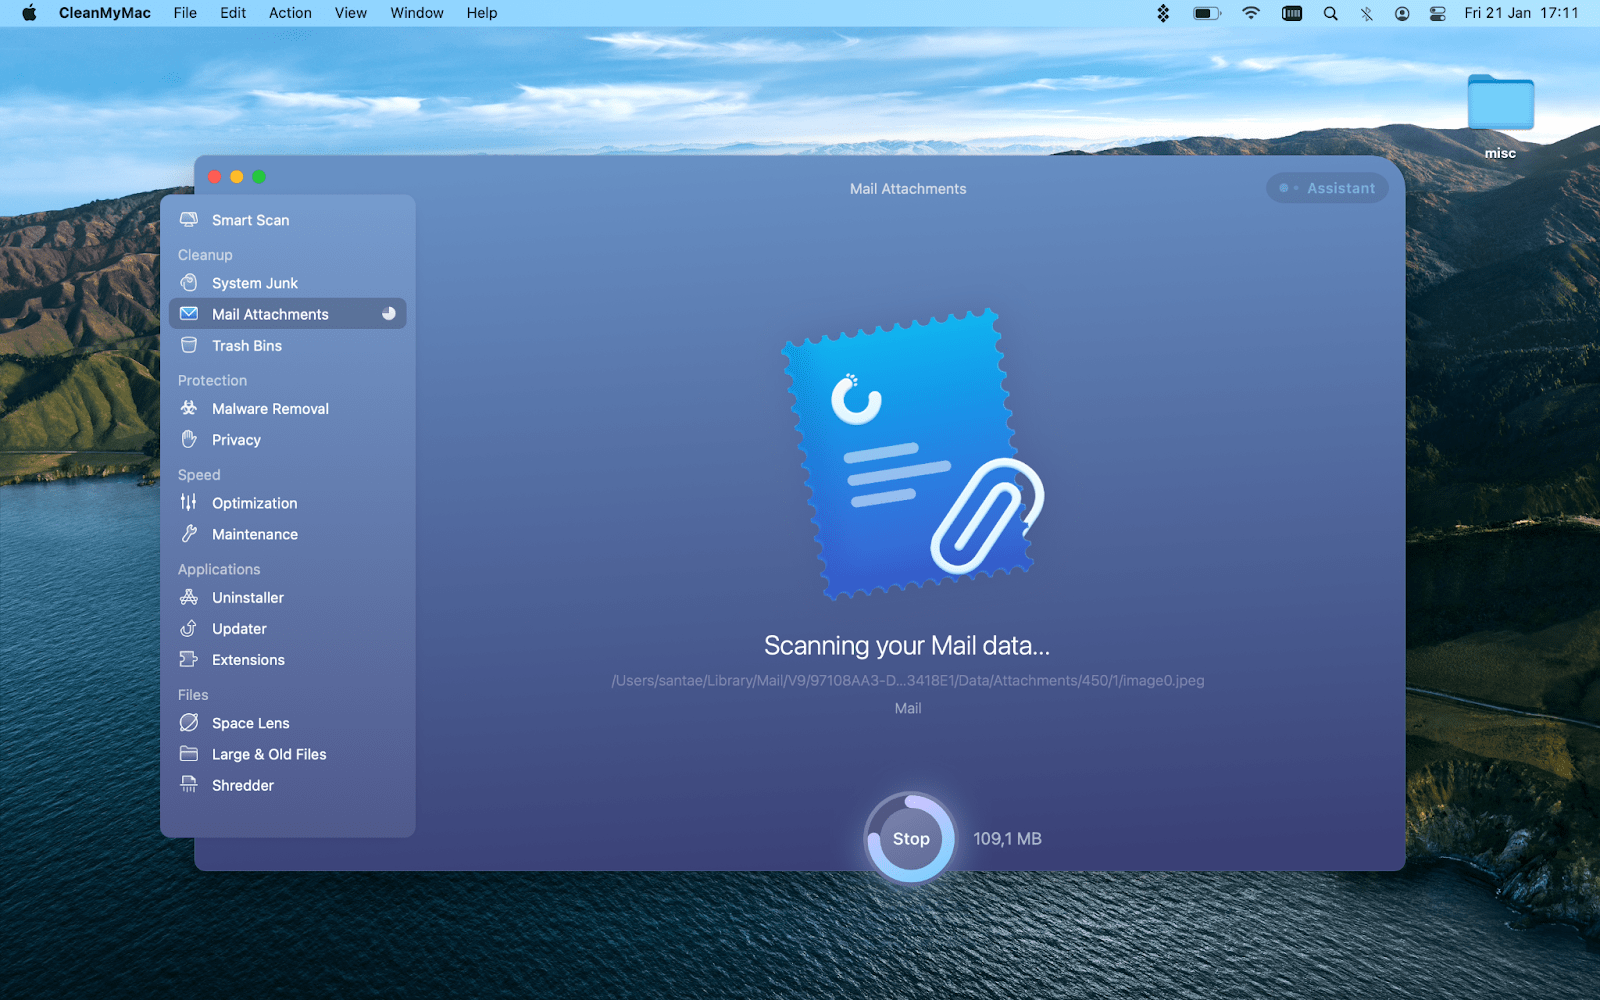 cleanmymac clean mail attachments